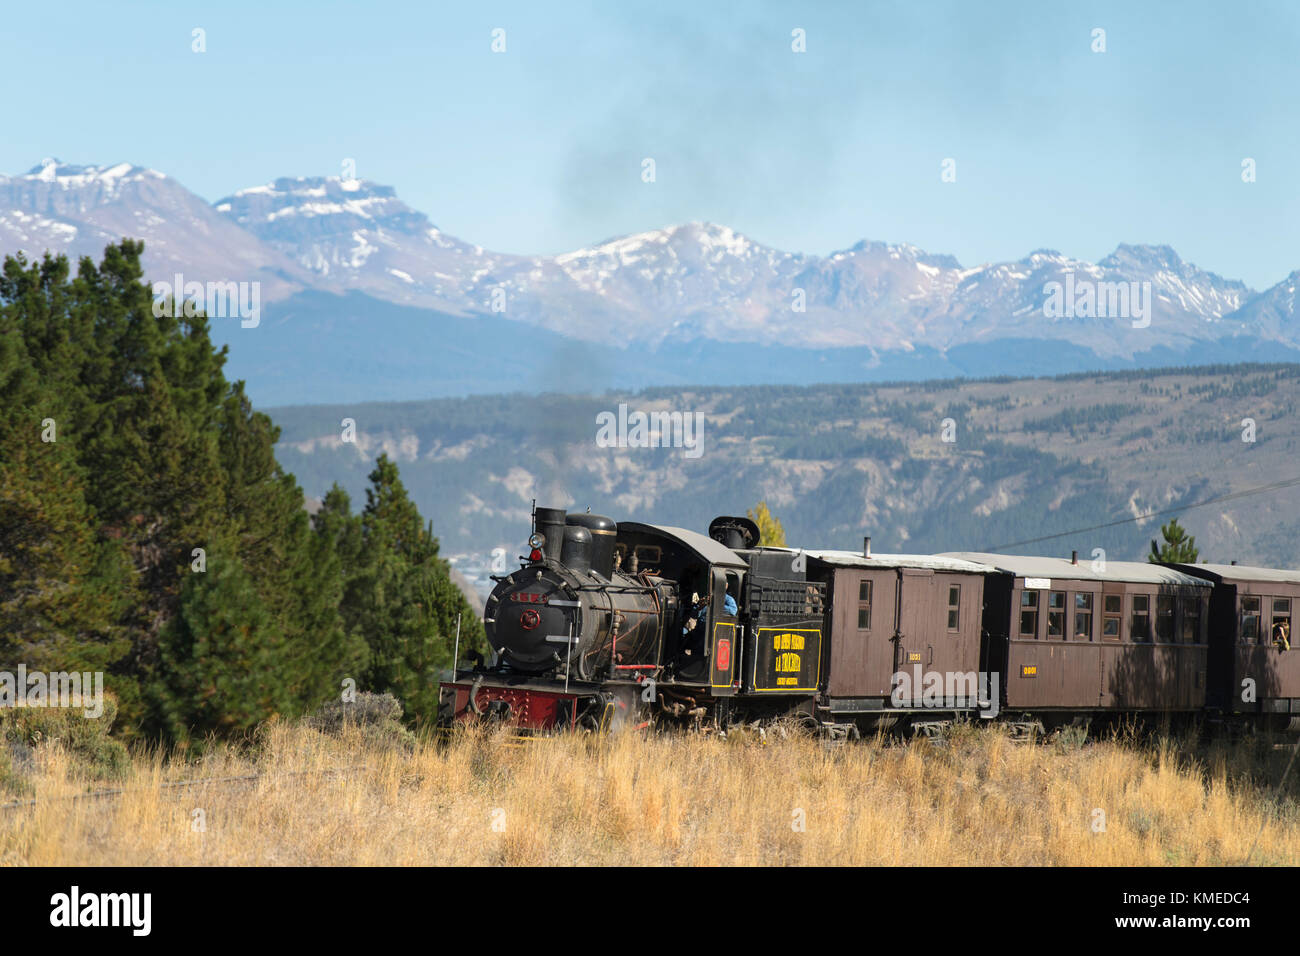 Locomotive crossing Old Patagonian Express railway with mountain range in background,Esquel,Chubut,Argentina Stock Photo